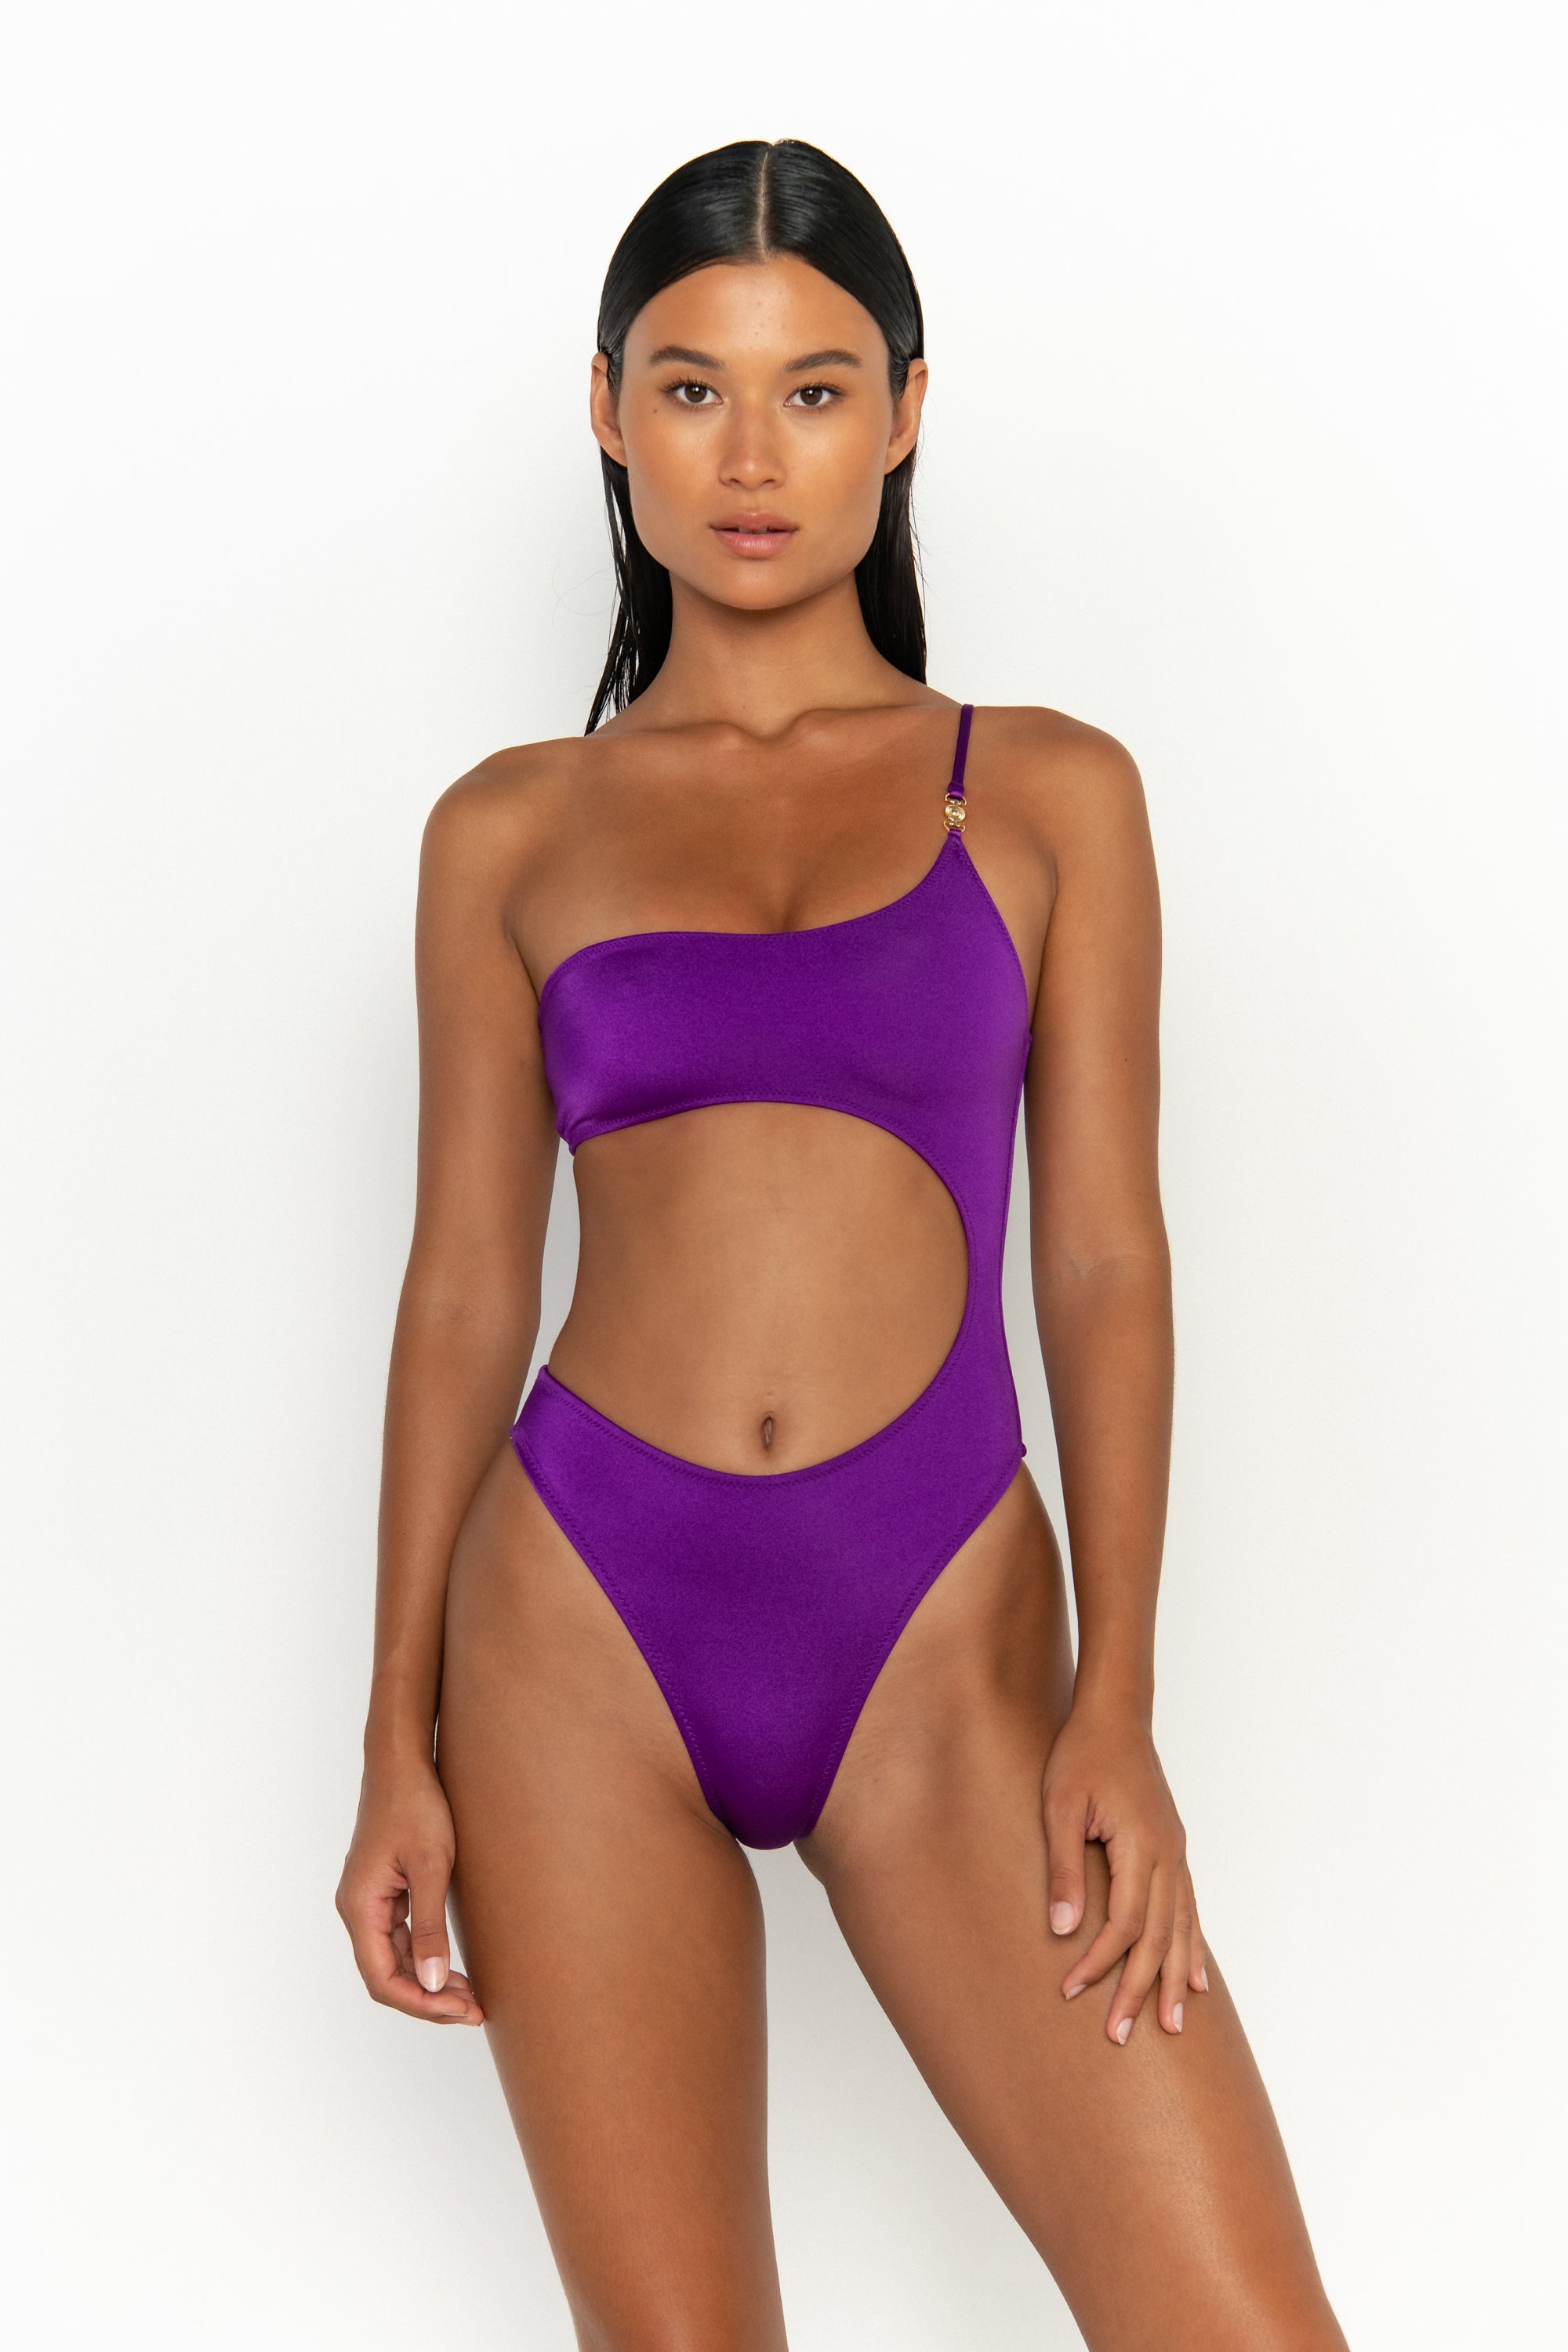 front view elegant woman wearing luxury swimsuit from sommer swim - bonita petunia is a purple one piece one shoulder swimsuit